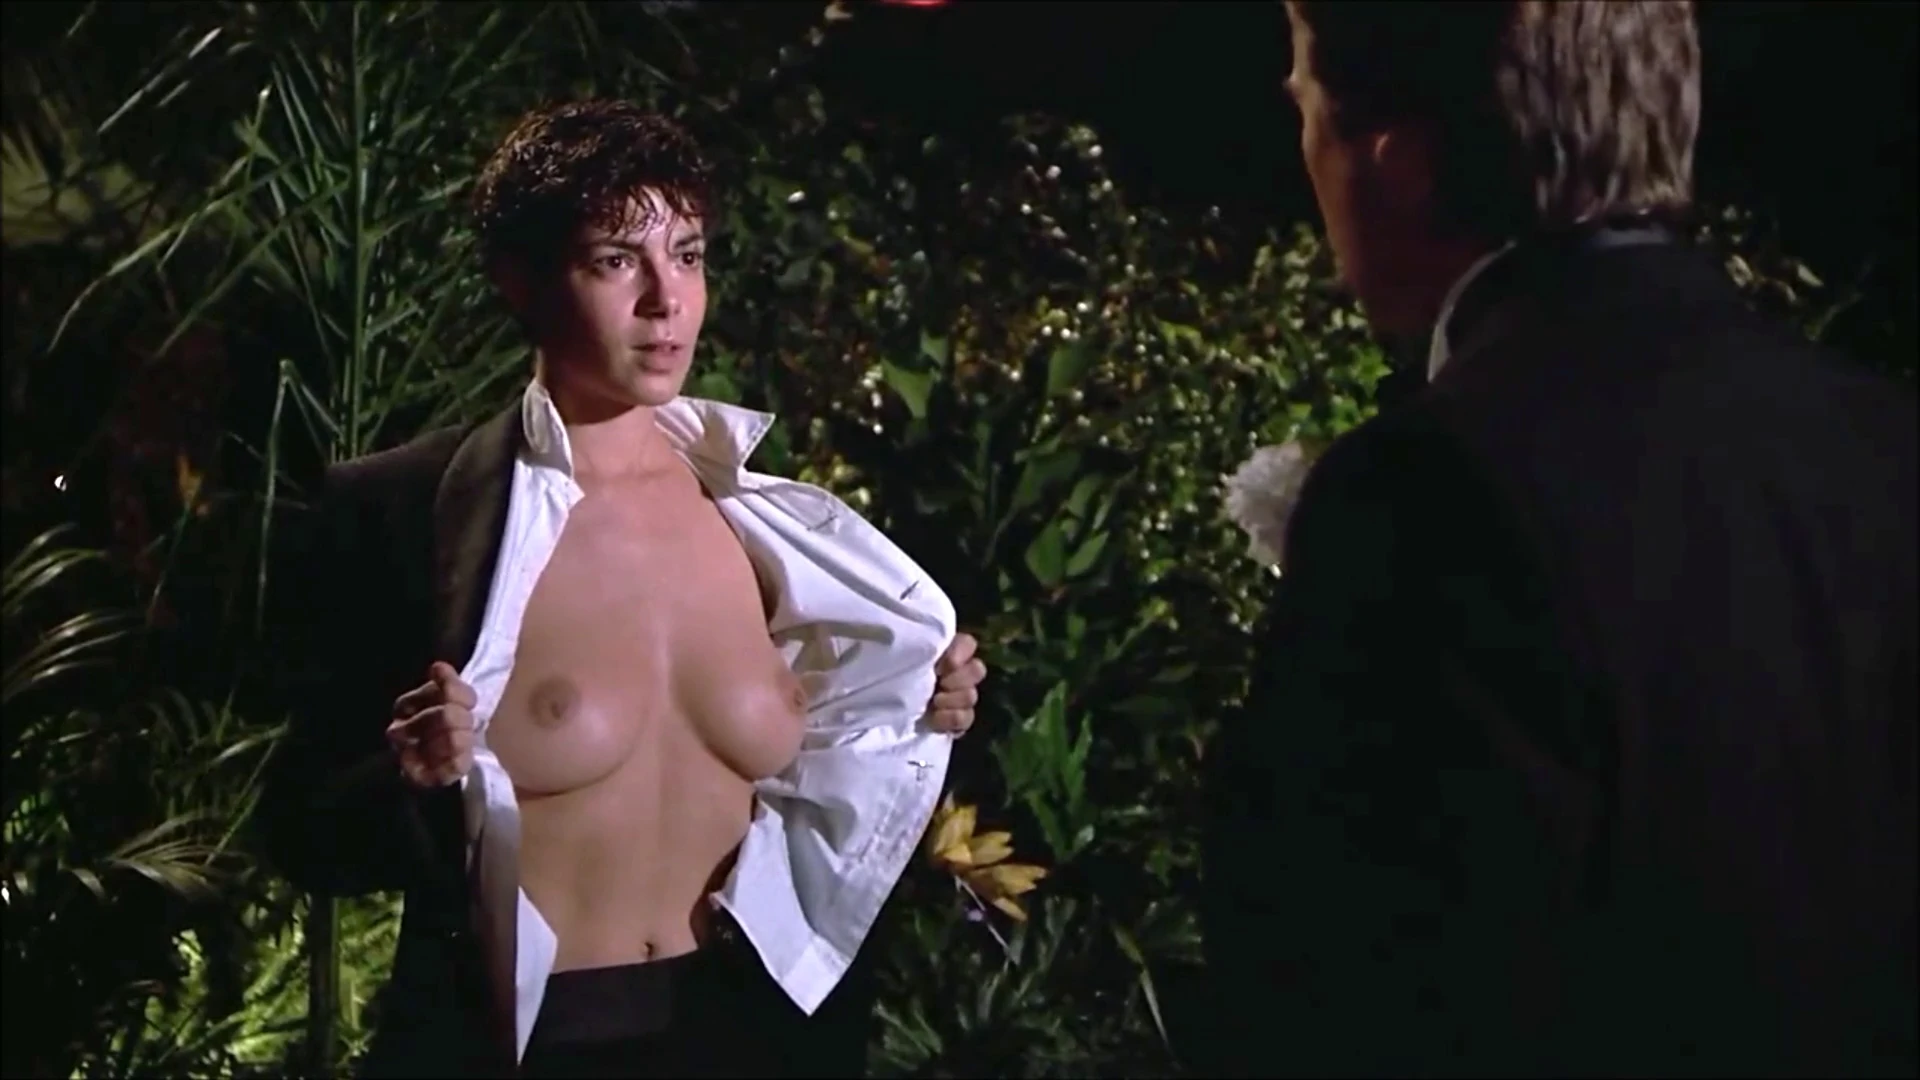 Just One of the Guys (1985), PG-13, Joyce Hyser (boobs). If anyone is interested, I have this sub that focuses on female nudity in PG and PG-13 movies